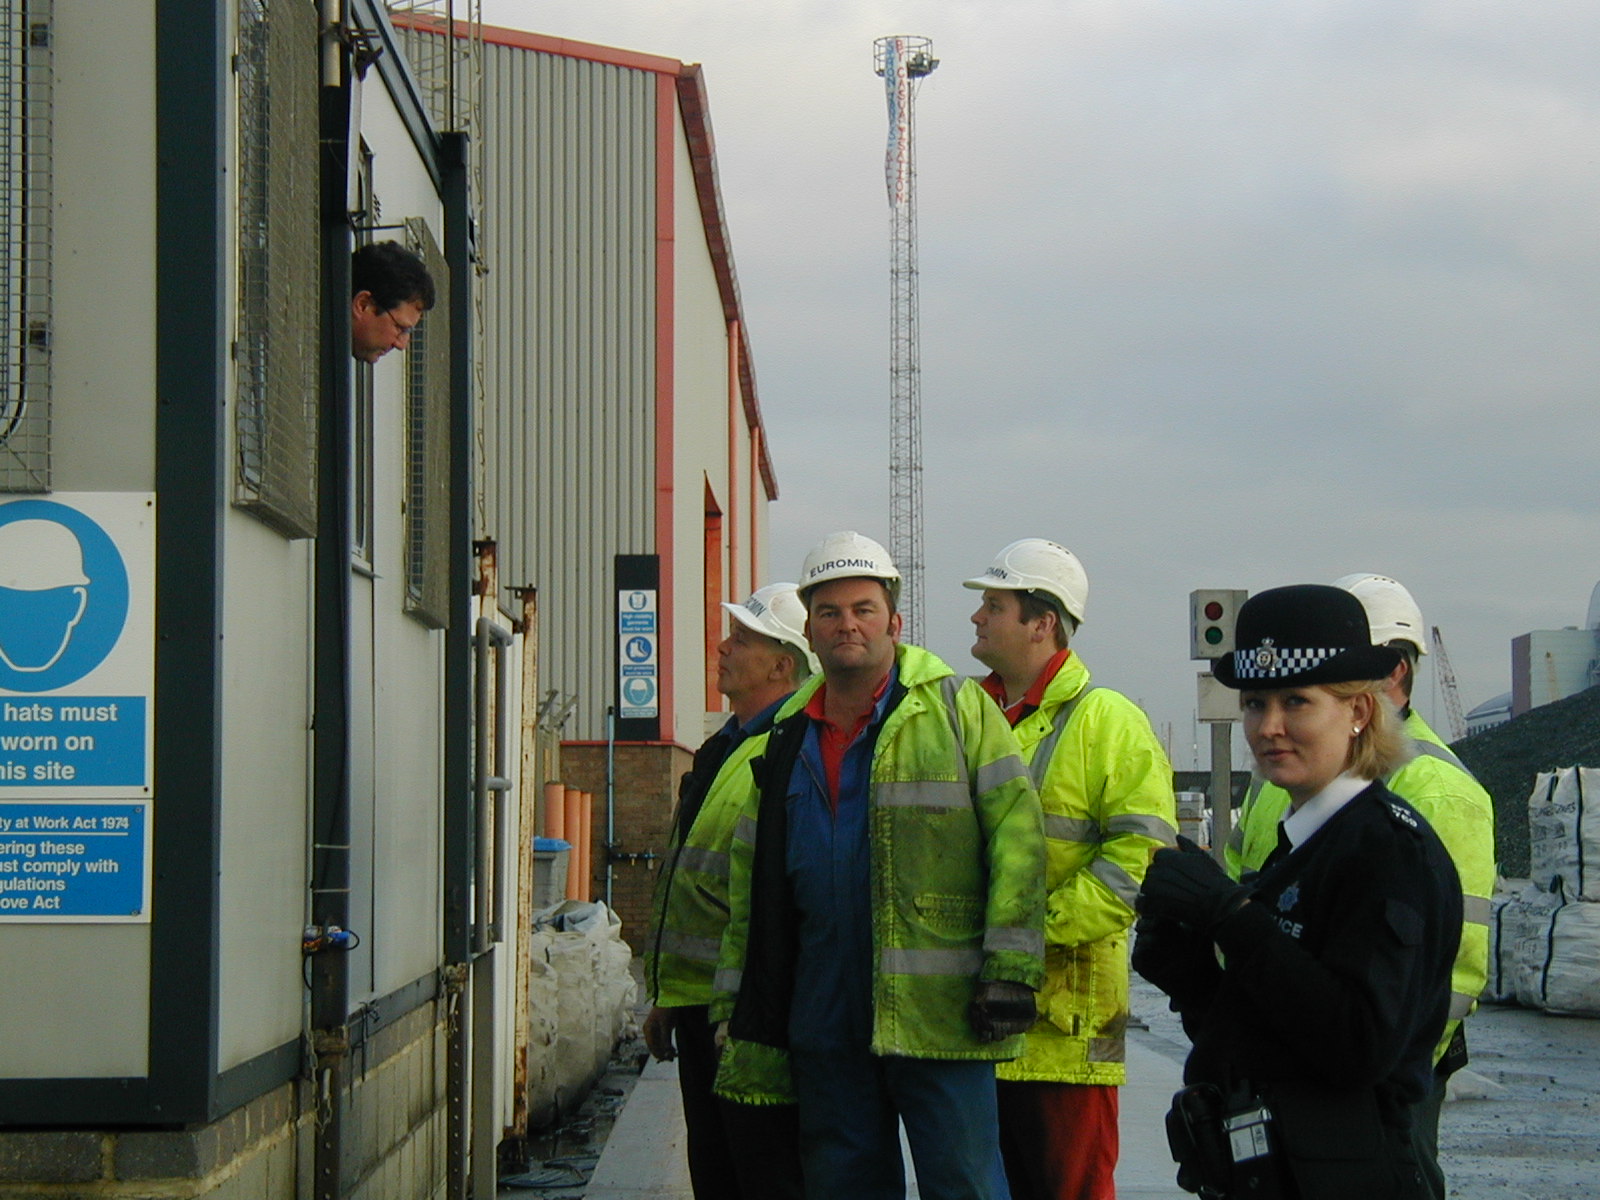 FICE CHARGED OVER SHOREHAM DOCKS PROTEST